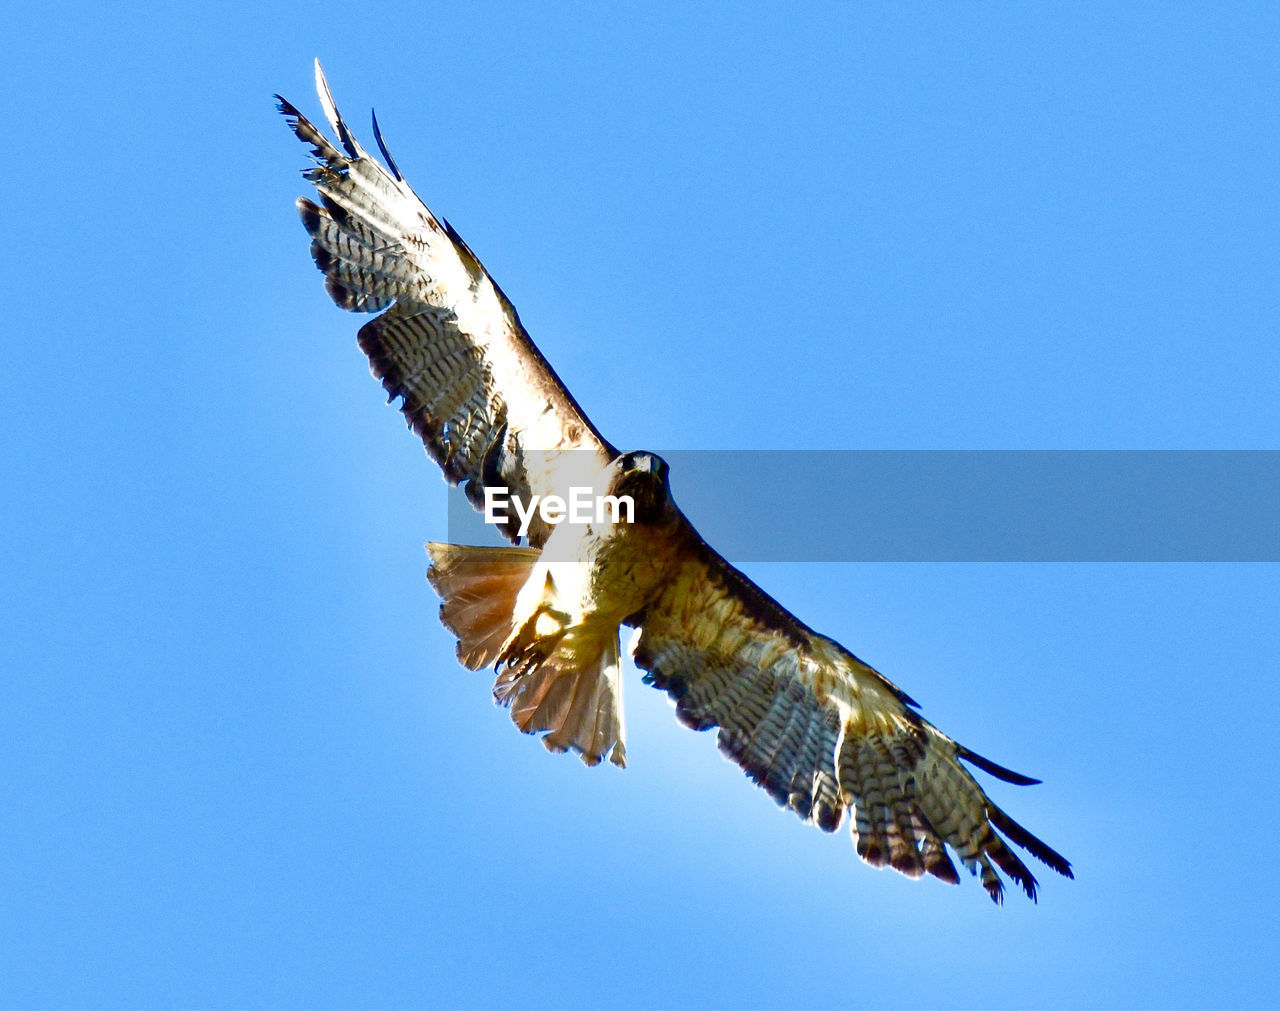 bird, animal, animal themes, flying, wildlife, animal wildlife, bird of prey, one animal, spread wings, sky, clear sky, animal body part, falcon, blue, eagle, buzzard, nature, hawk, no people, sunny, kite, mid-air, beak, wing, motion, low angle view, animal wing, day, outdoors, beauty in nature, bald eagle, vulture, full length